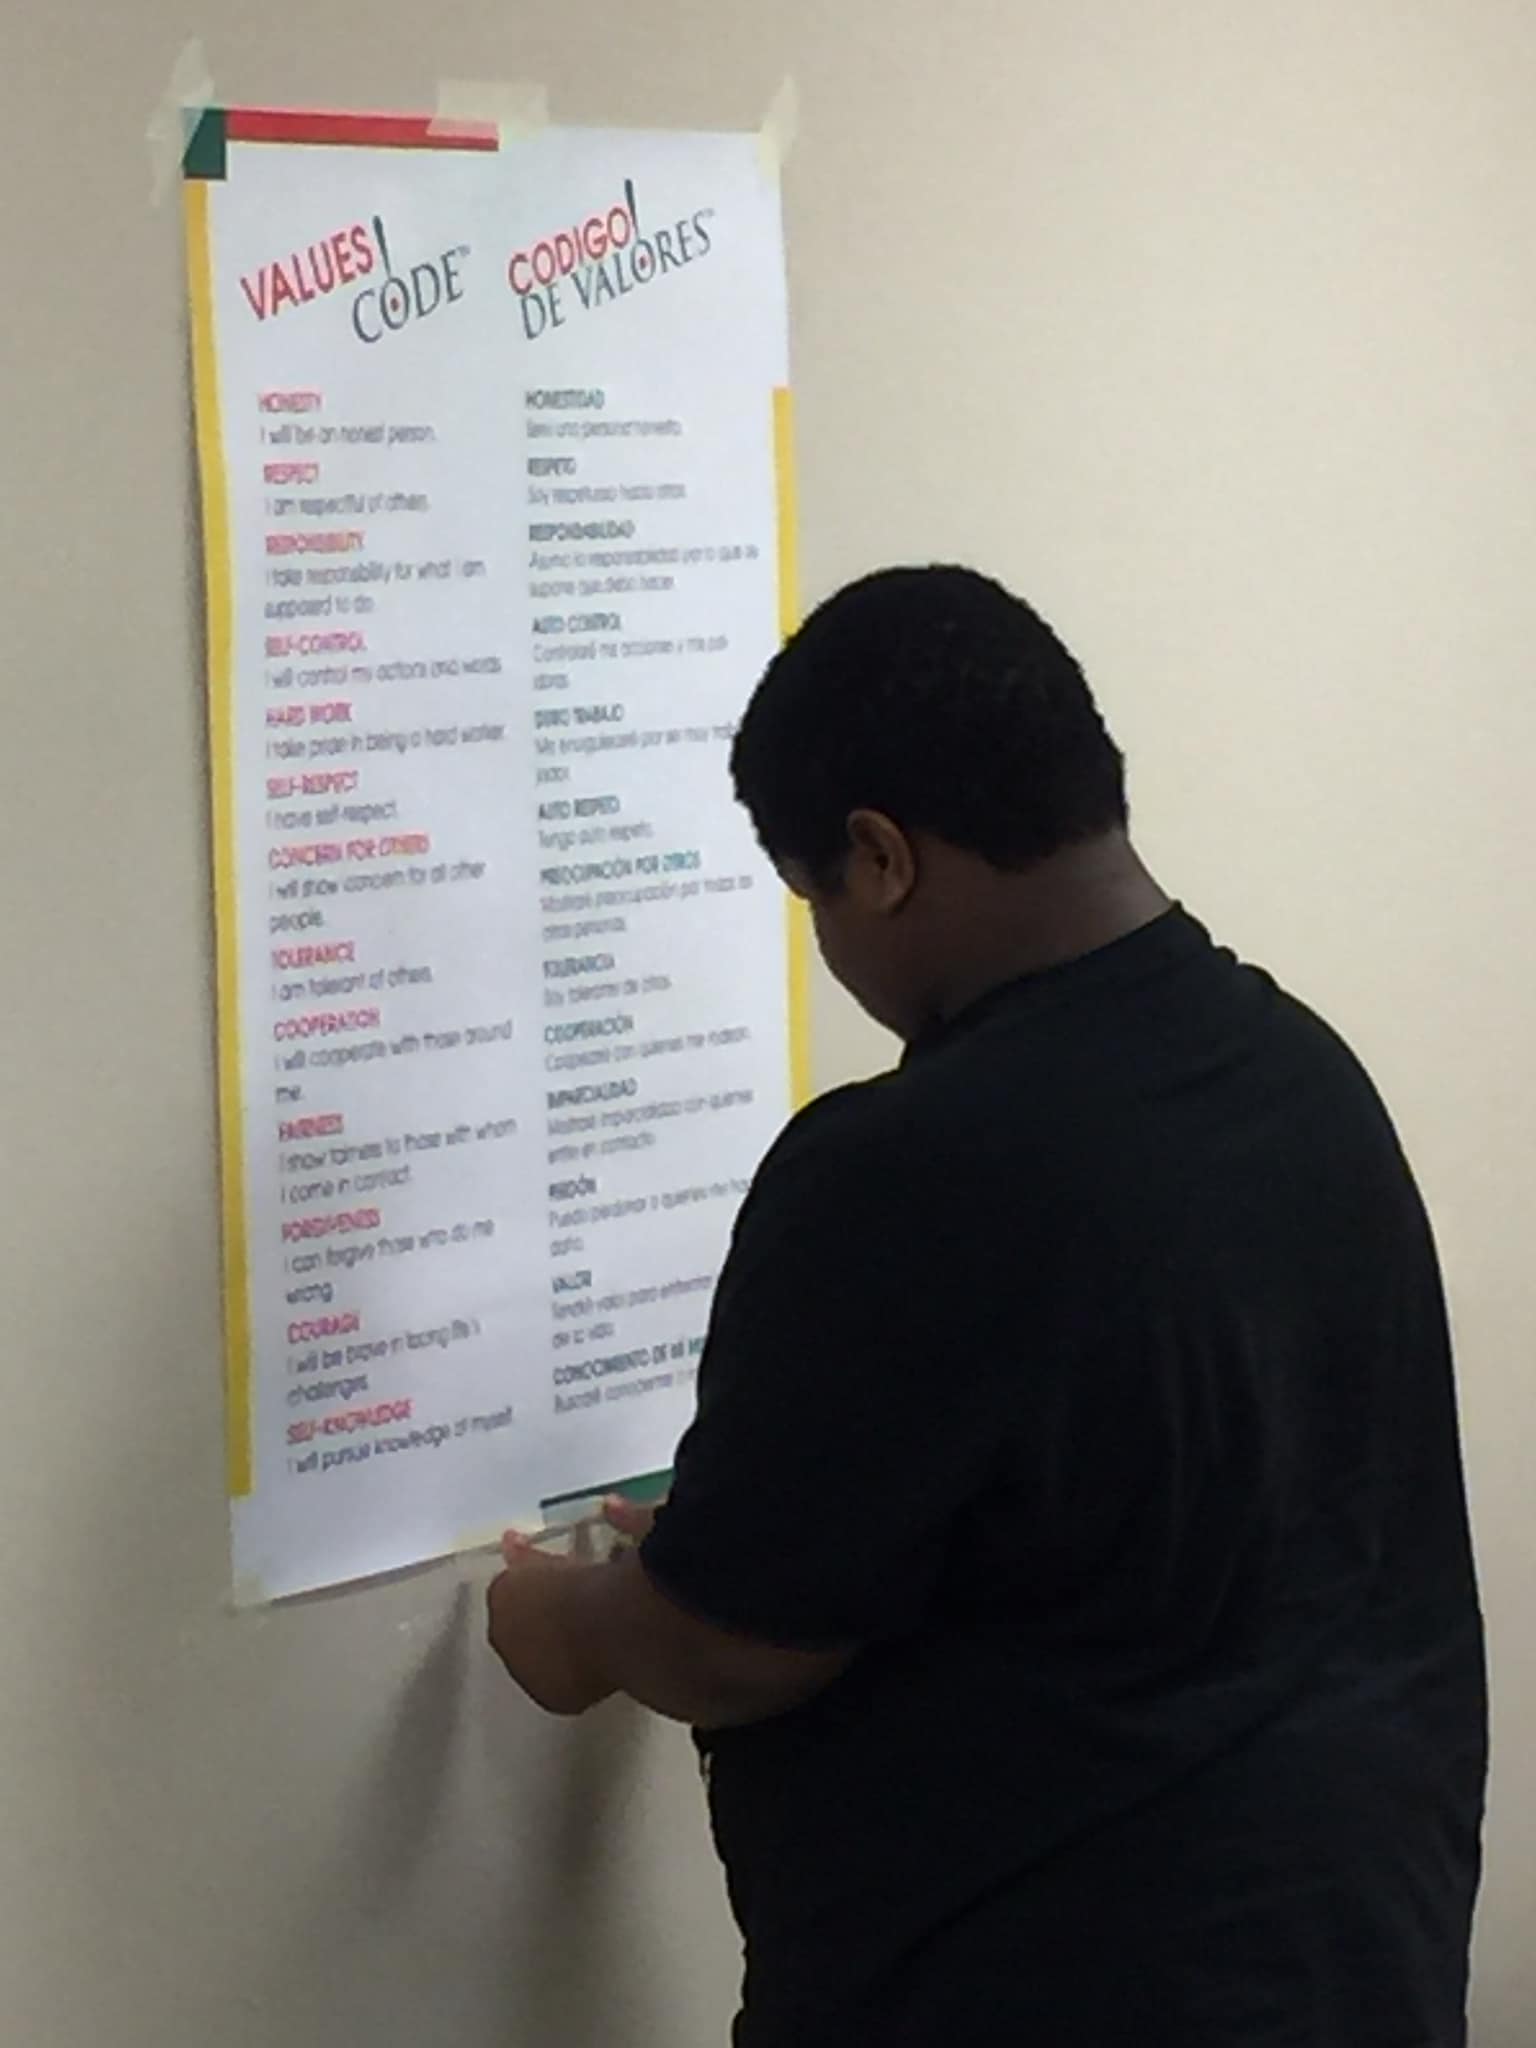 Image of a student from behind putting up a poster of the "Values Code" which issed to teach in classes.